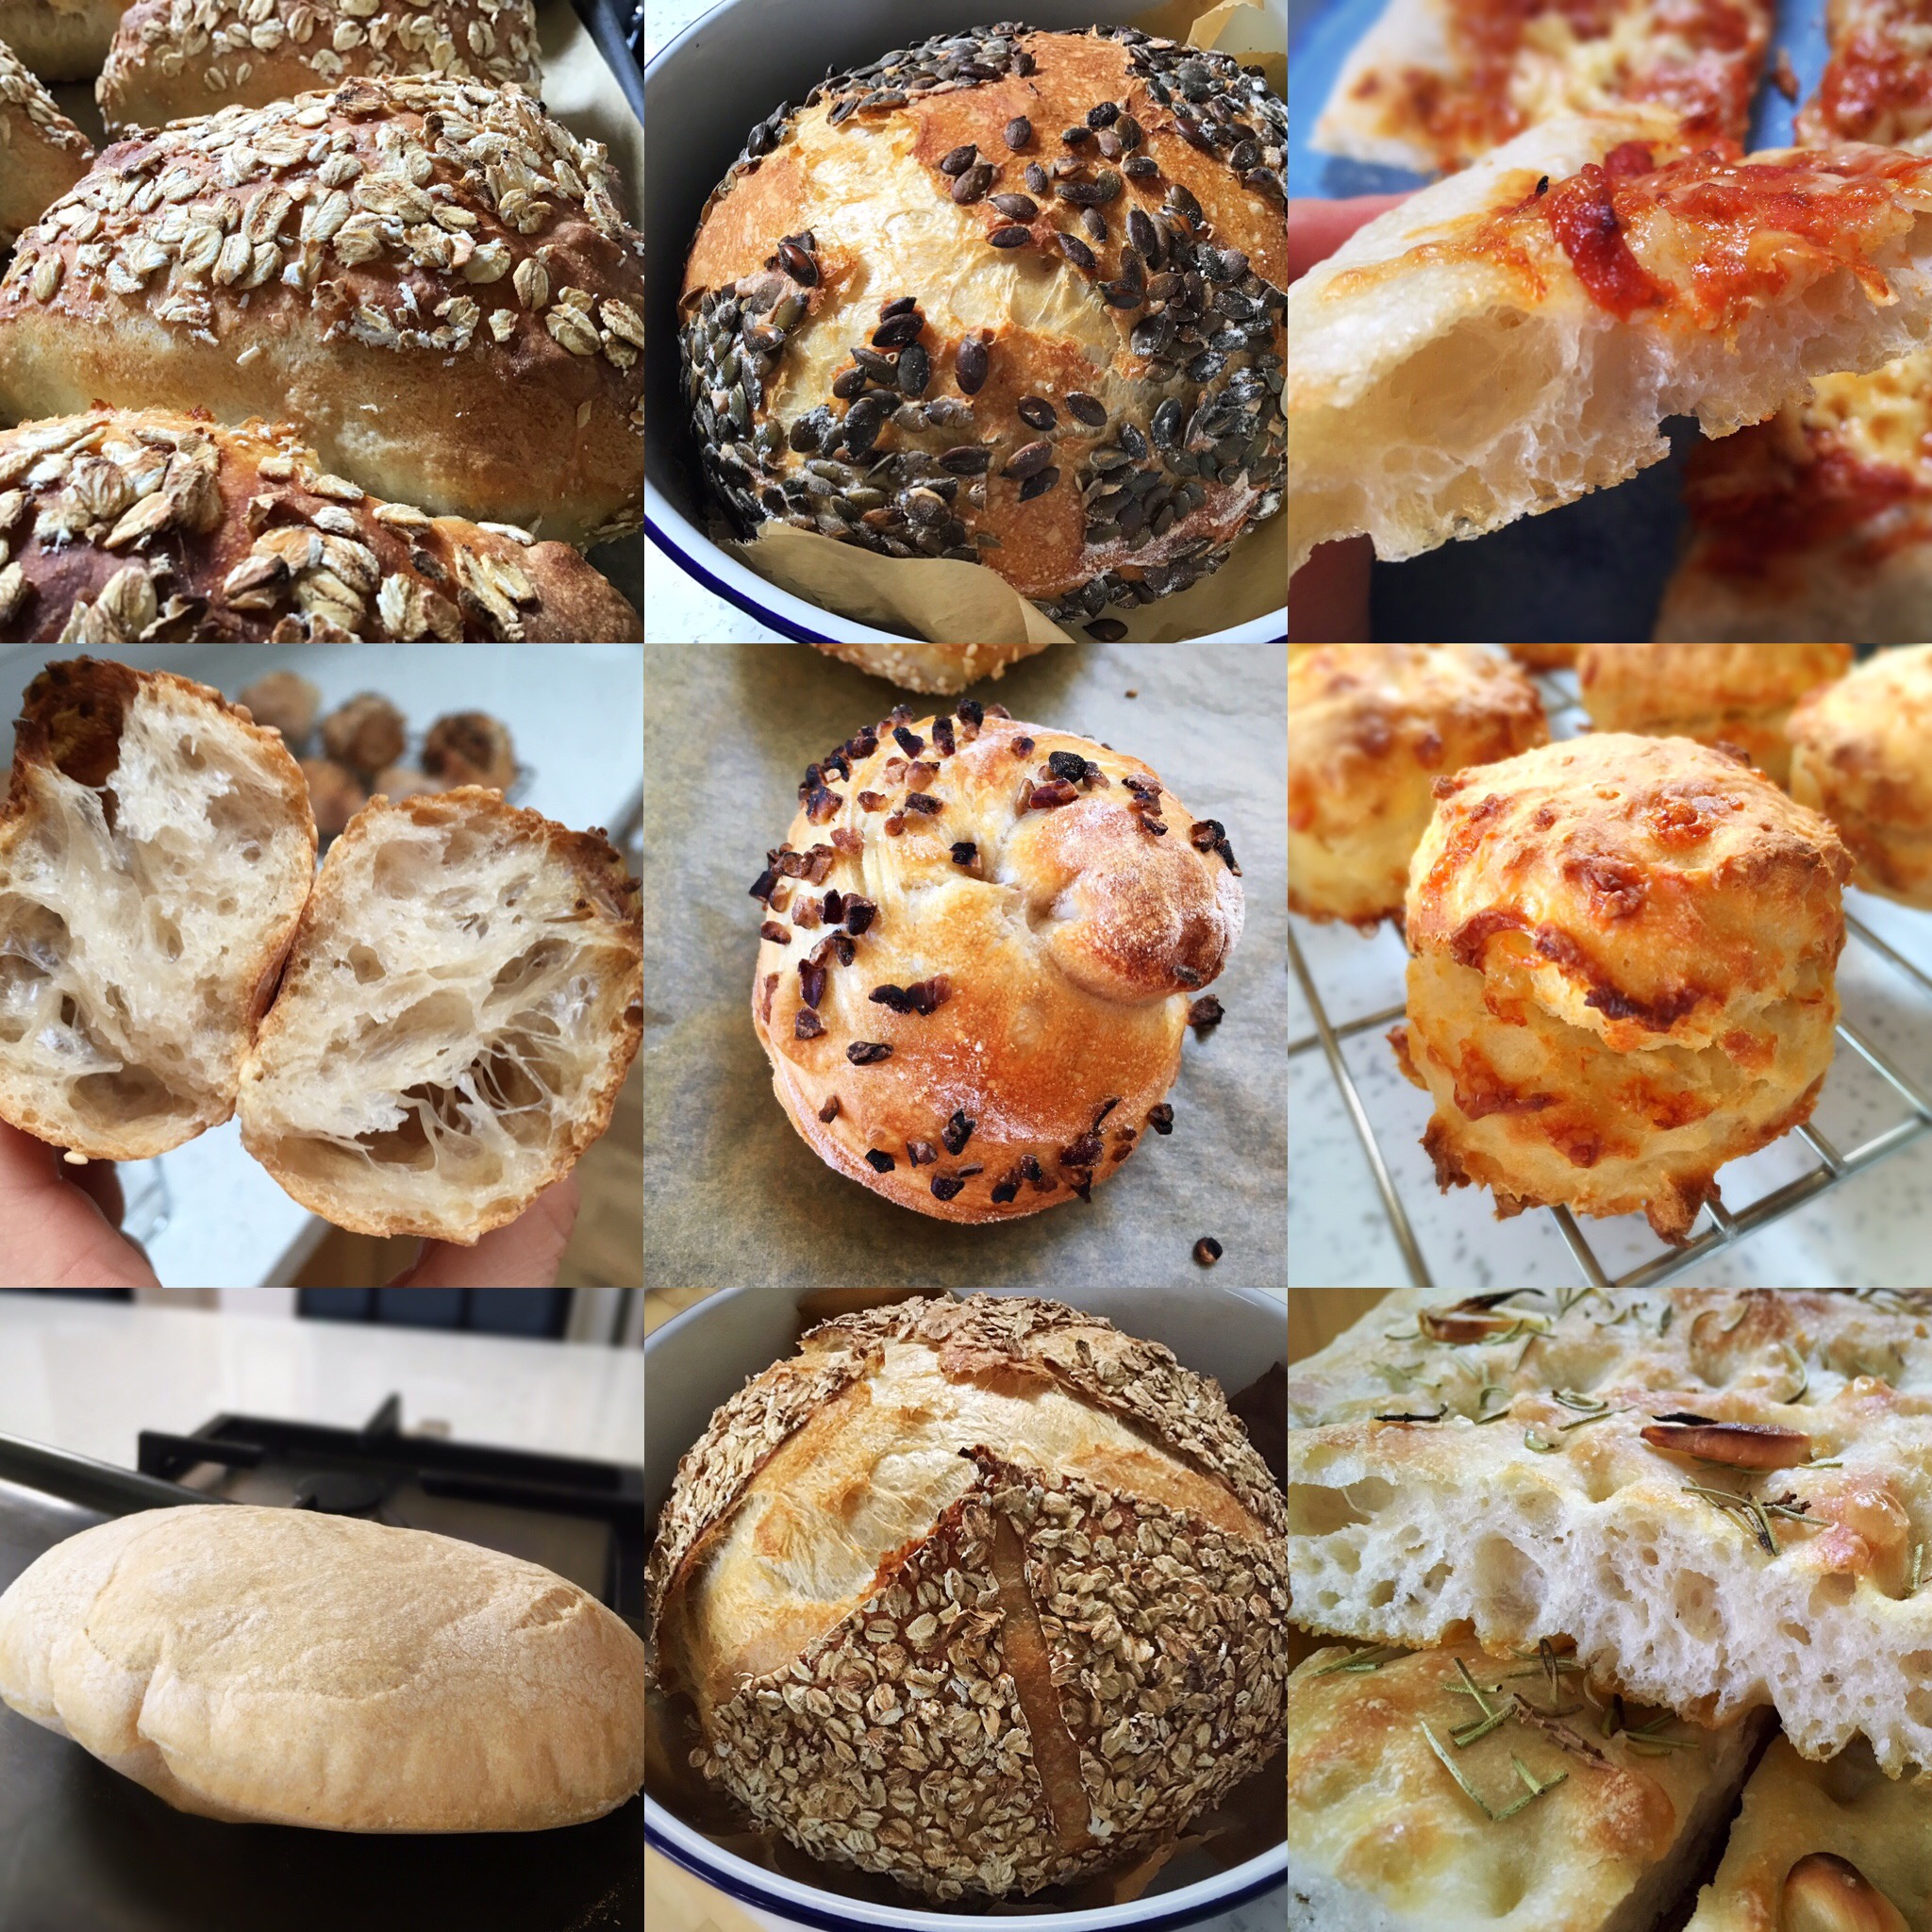 A bunch of different types of bread that are on the table